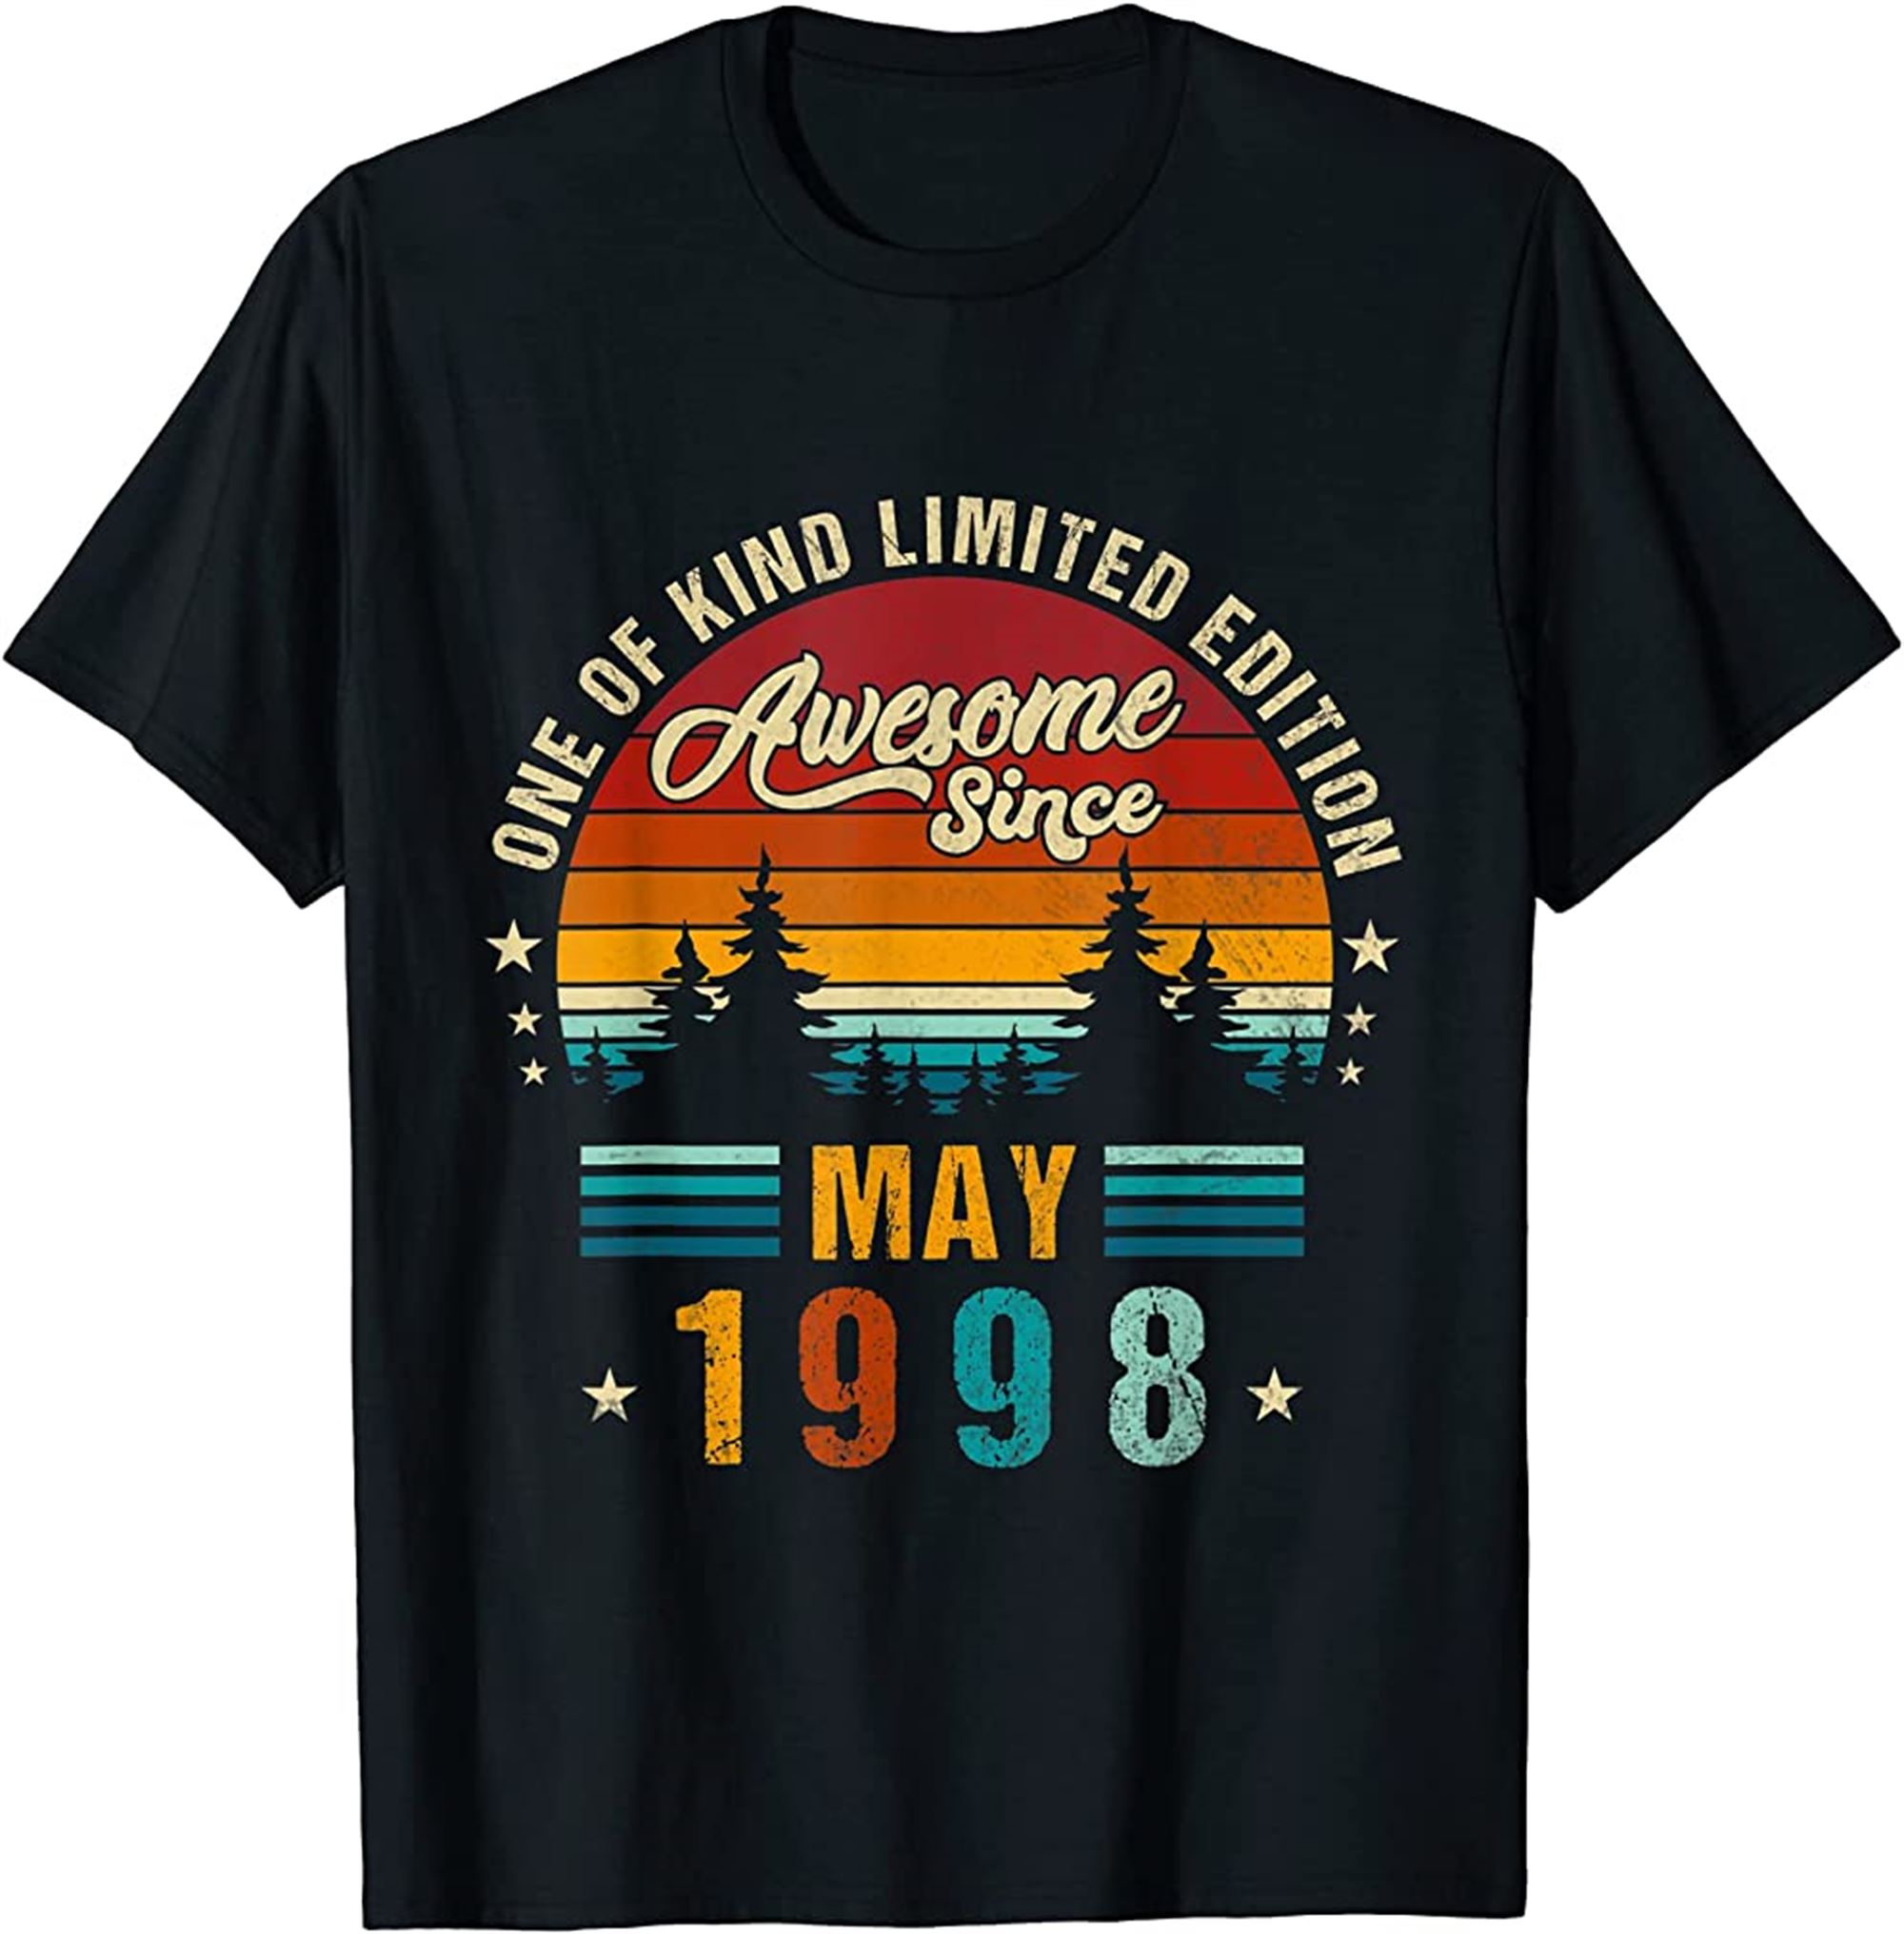 Vintage 24th Birthday Awesome Since May 1998 Epic Legend T-shirt Plus Size Up To 5xl